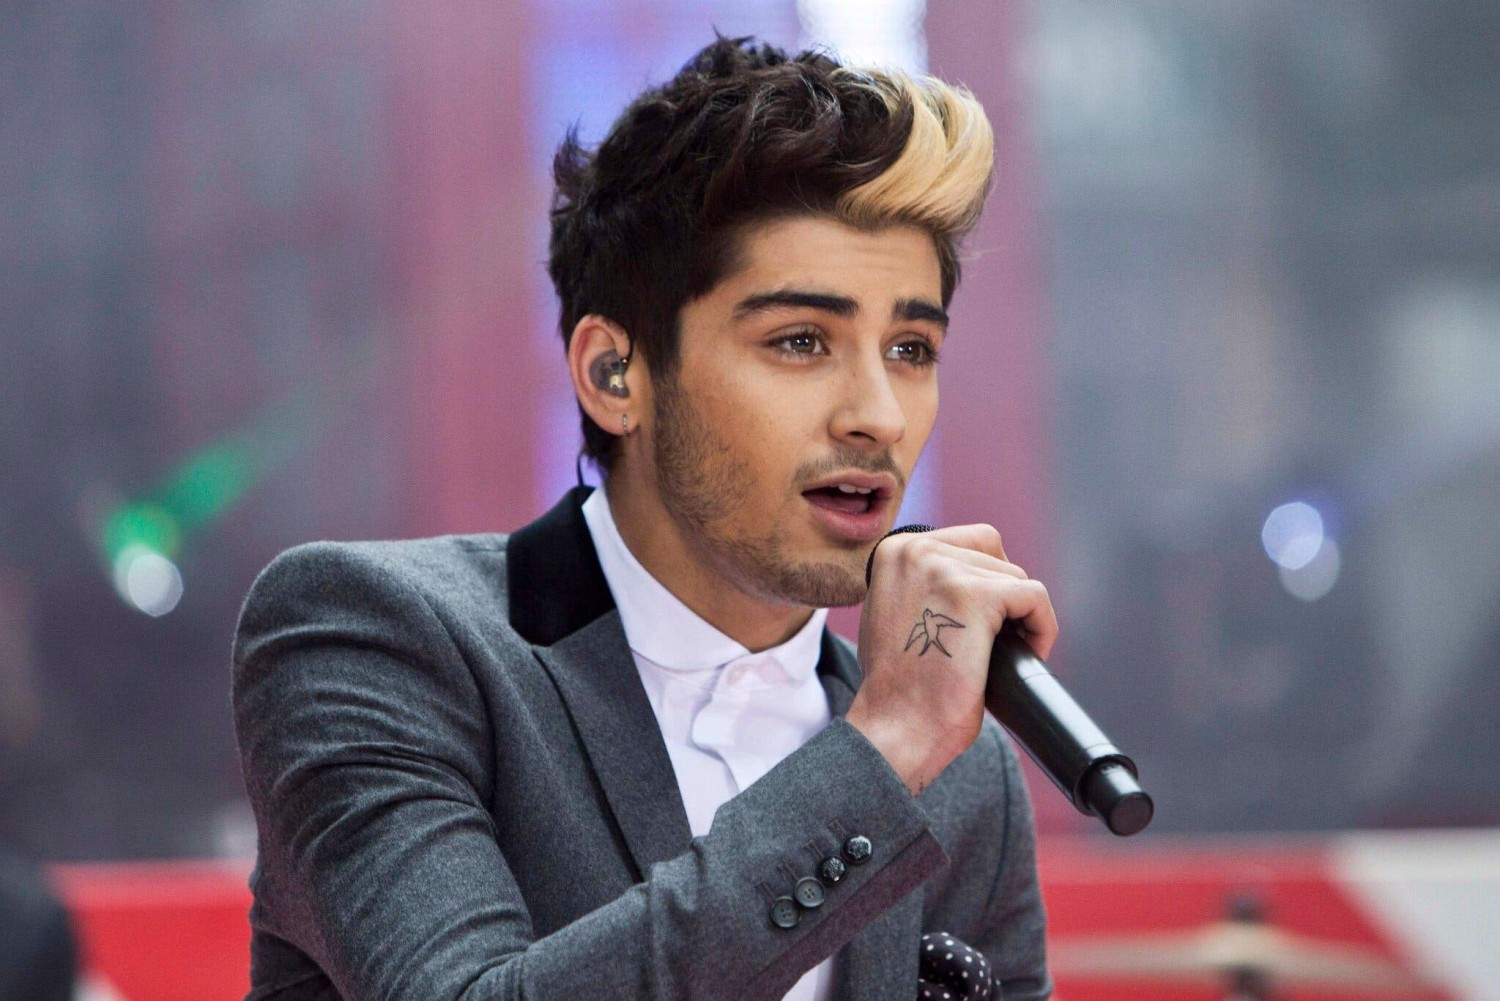 Zayn Malik performing with his band One Direction on NBC’s “Today” show in New York City in 2012.Credit...Andrew Burton/Reuters